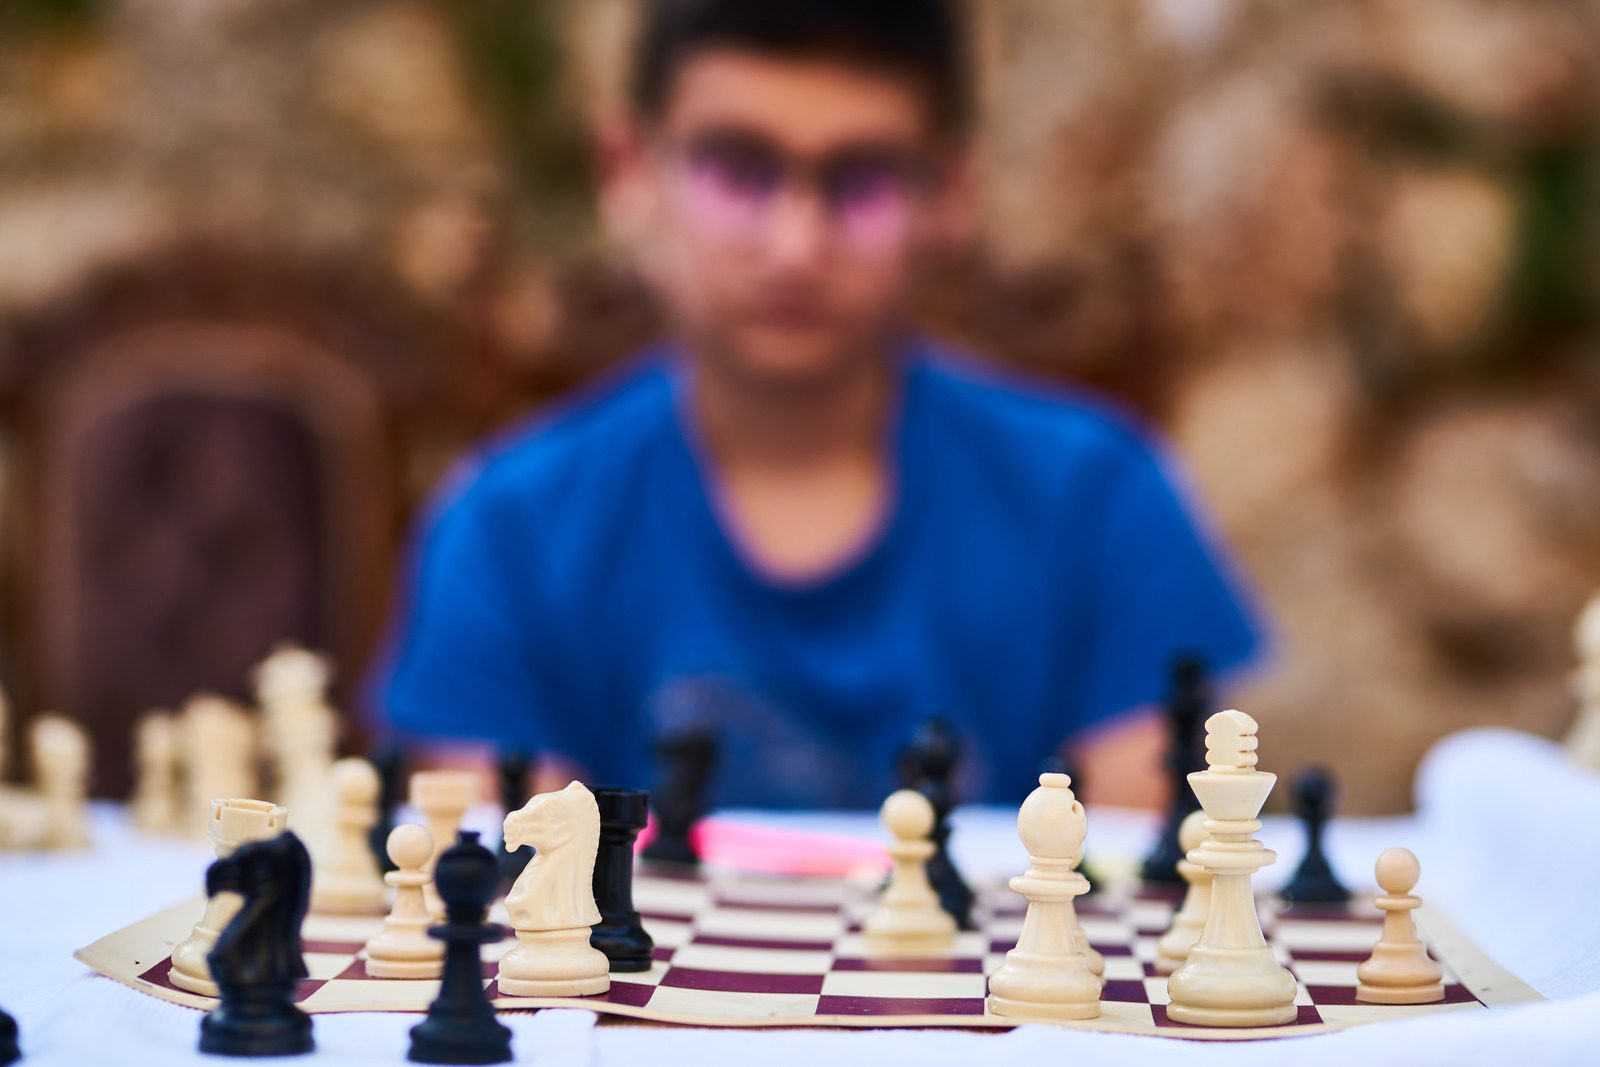 Child thinking of strategy and playing chess